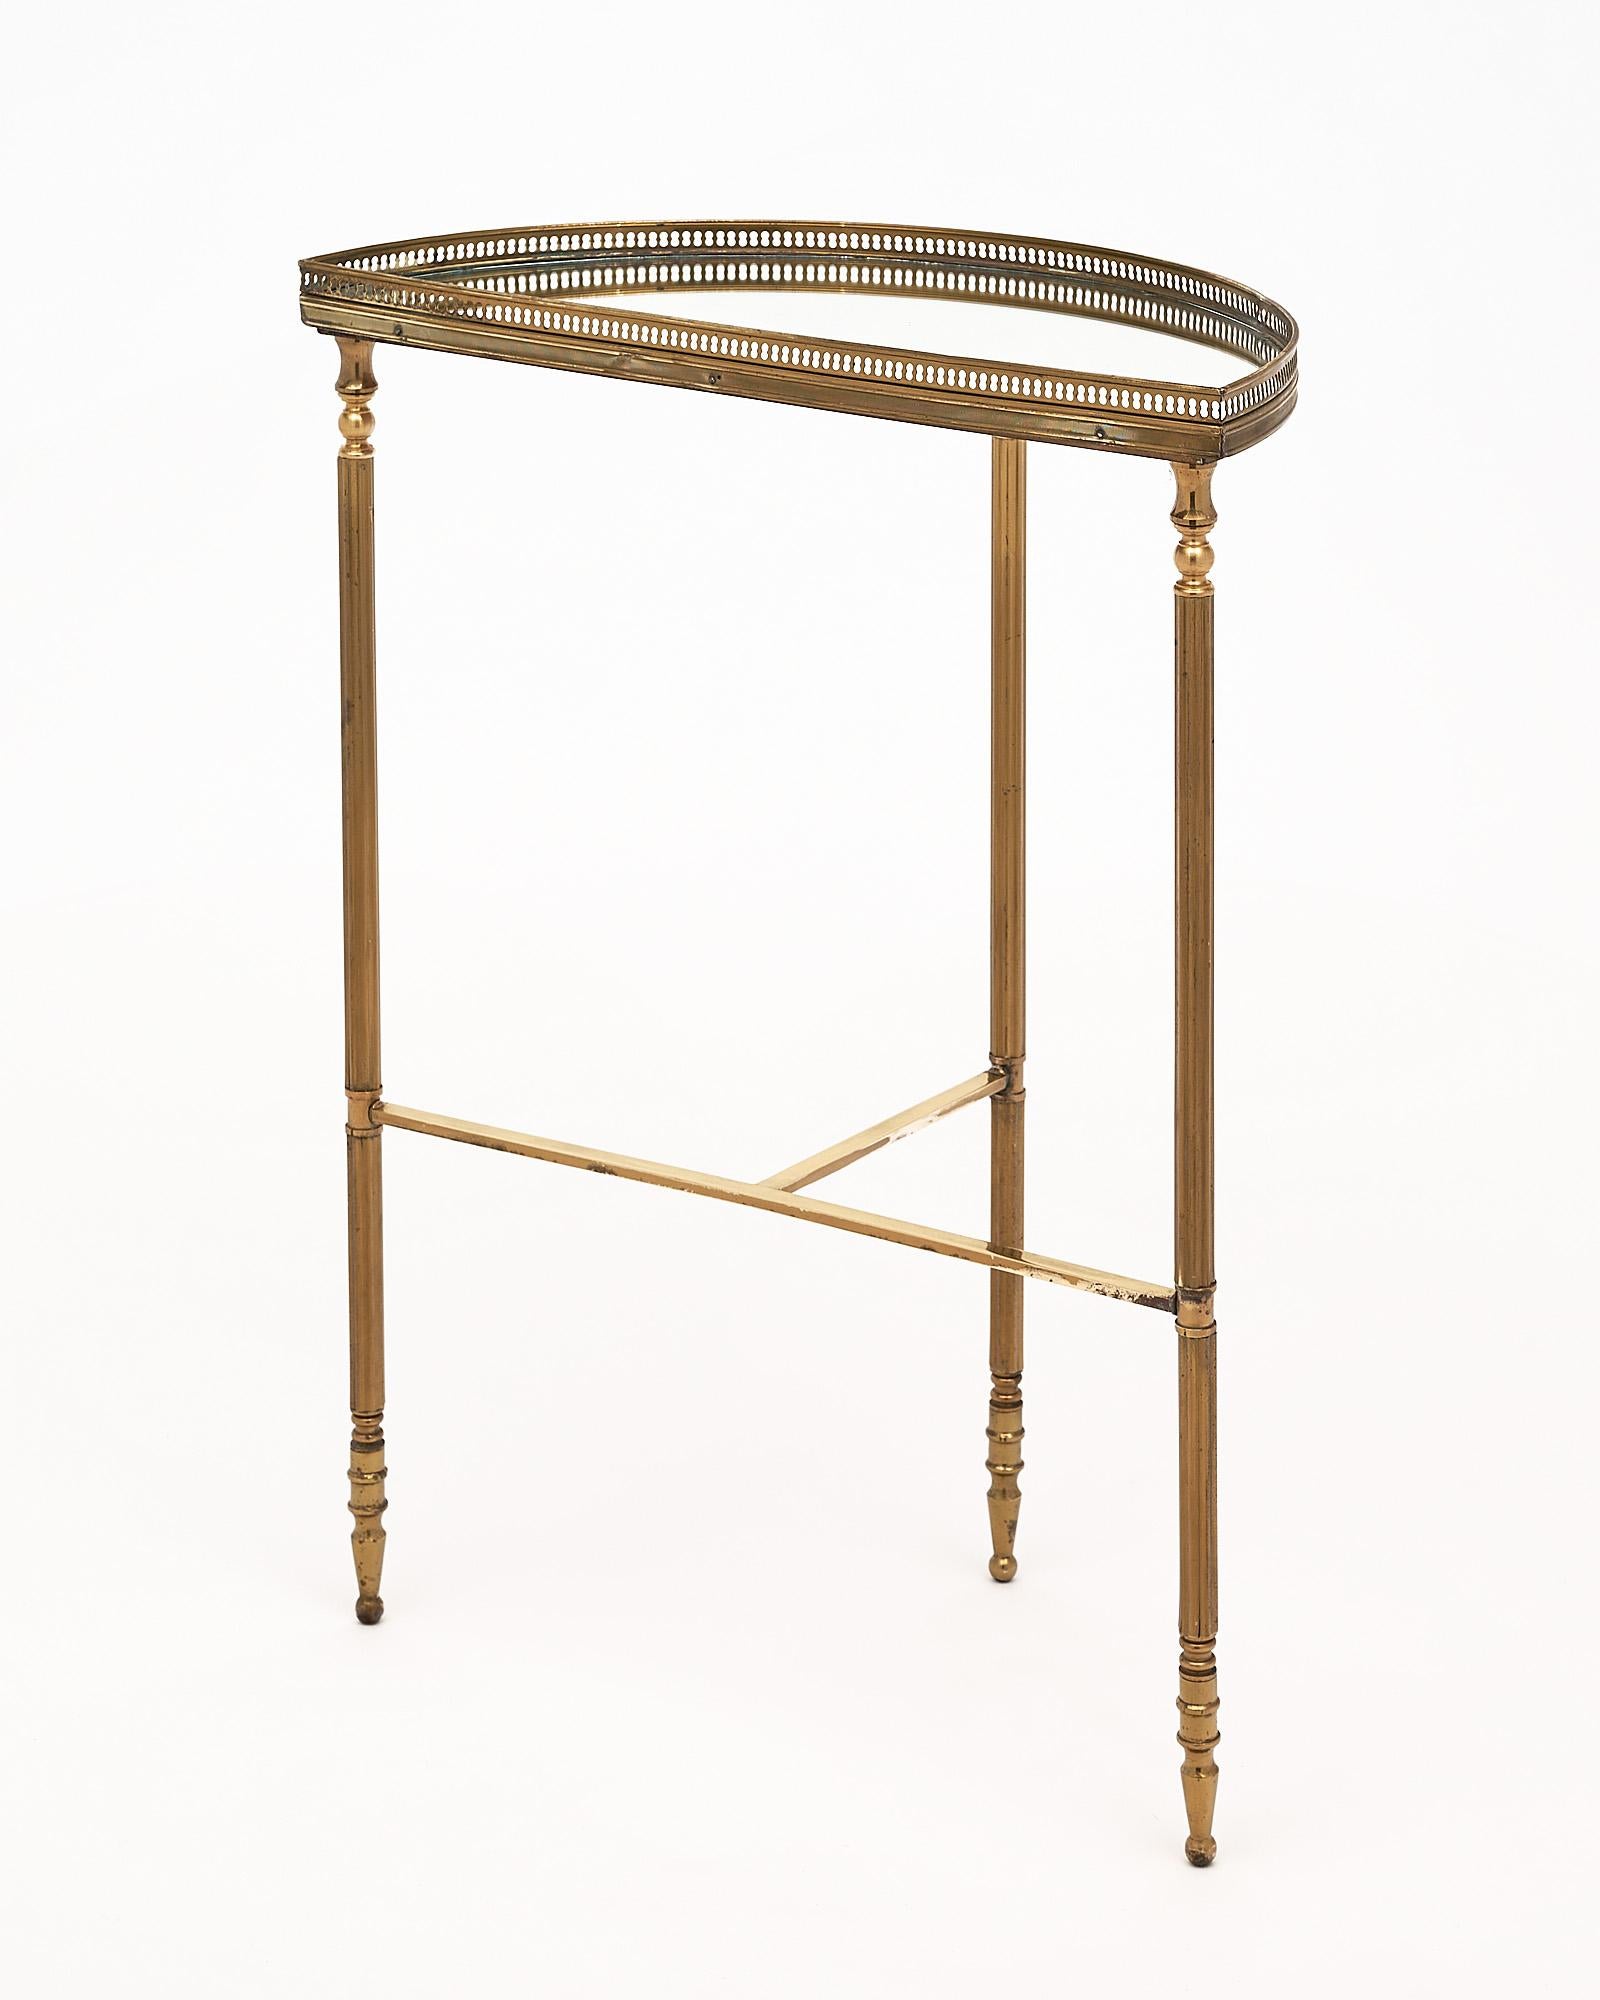 Demilune console, French, by Maison Bagues. There is a mirrored top with an opened brass gallery and ridged brass legs held together with a stretcher.